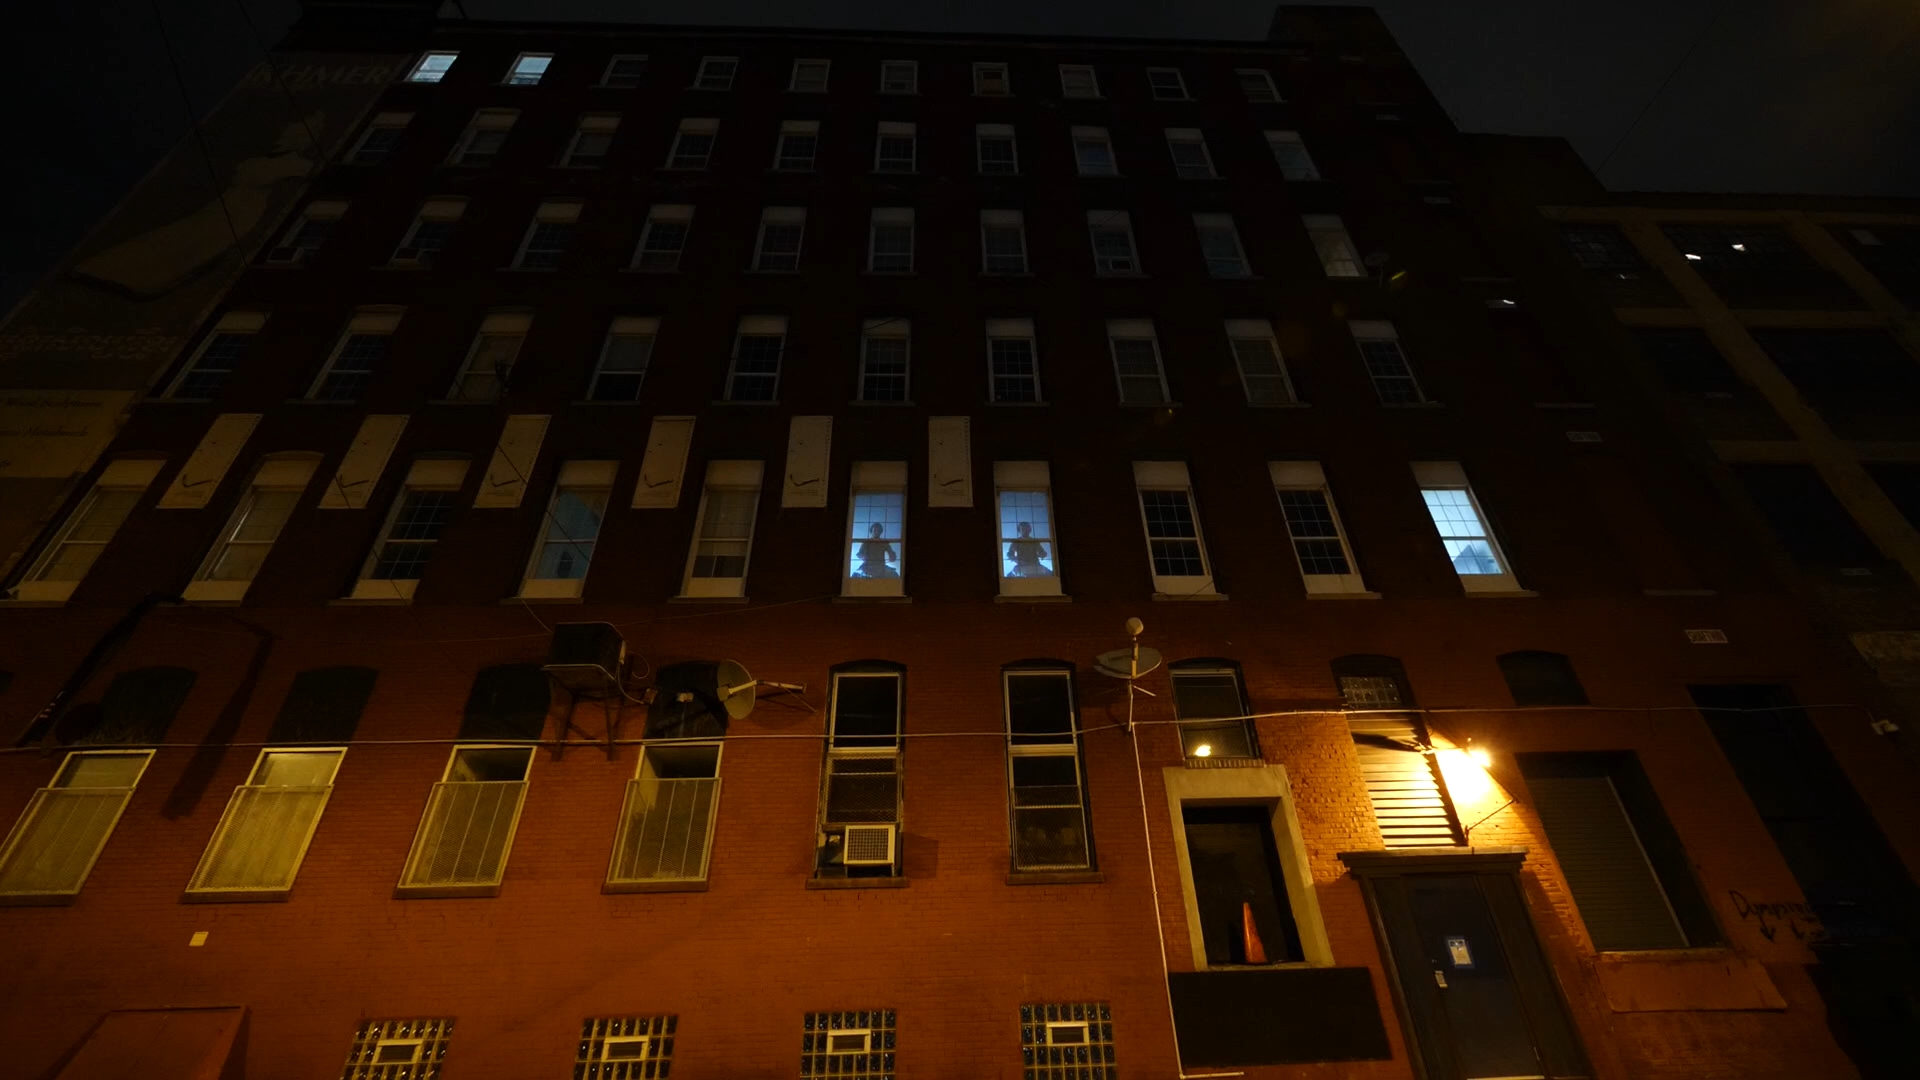 Rob Cosgrove, Broadcast presence (2021). Two silhouettes of drummers illuminated in windows of a building at night.